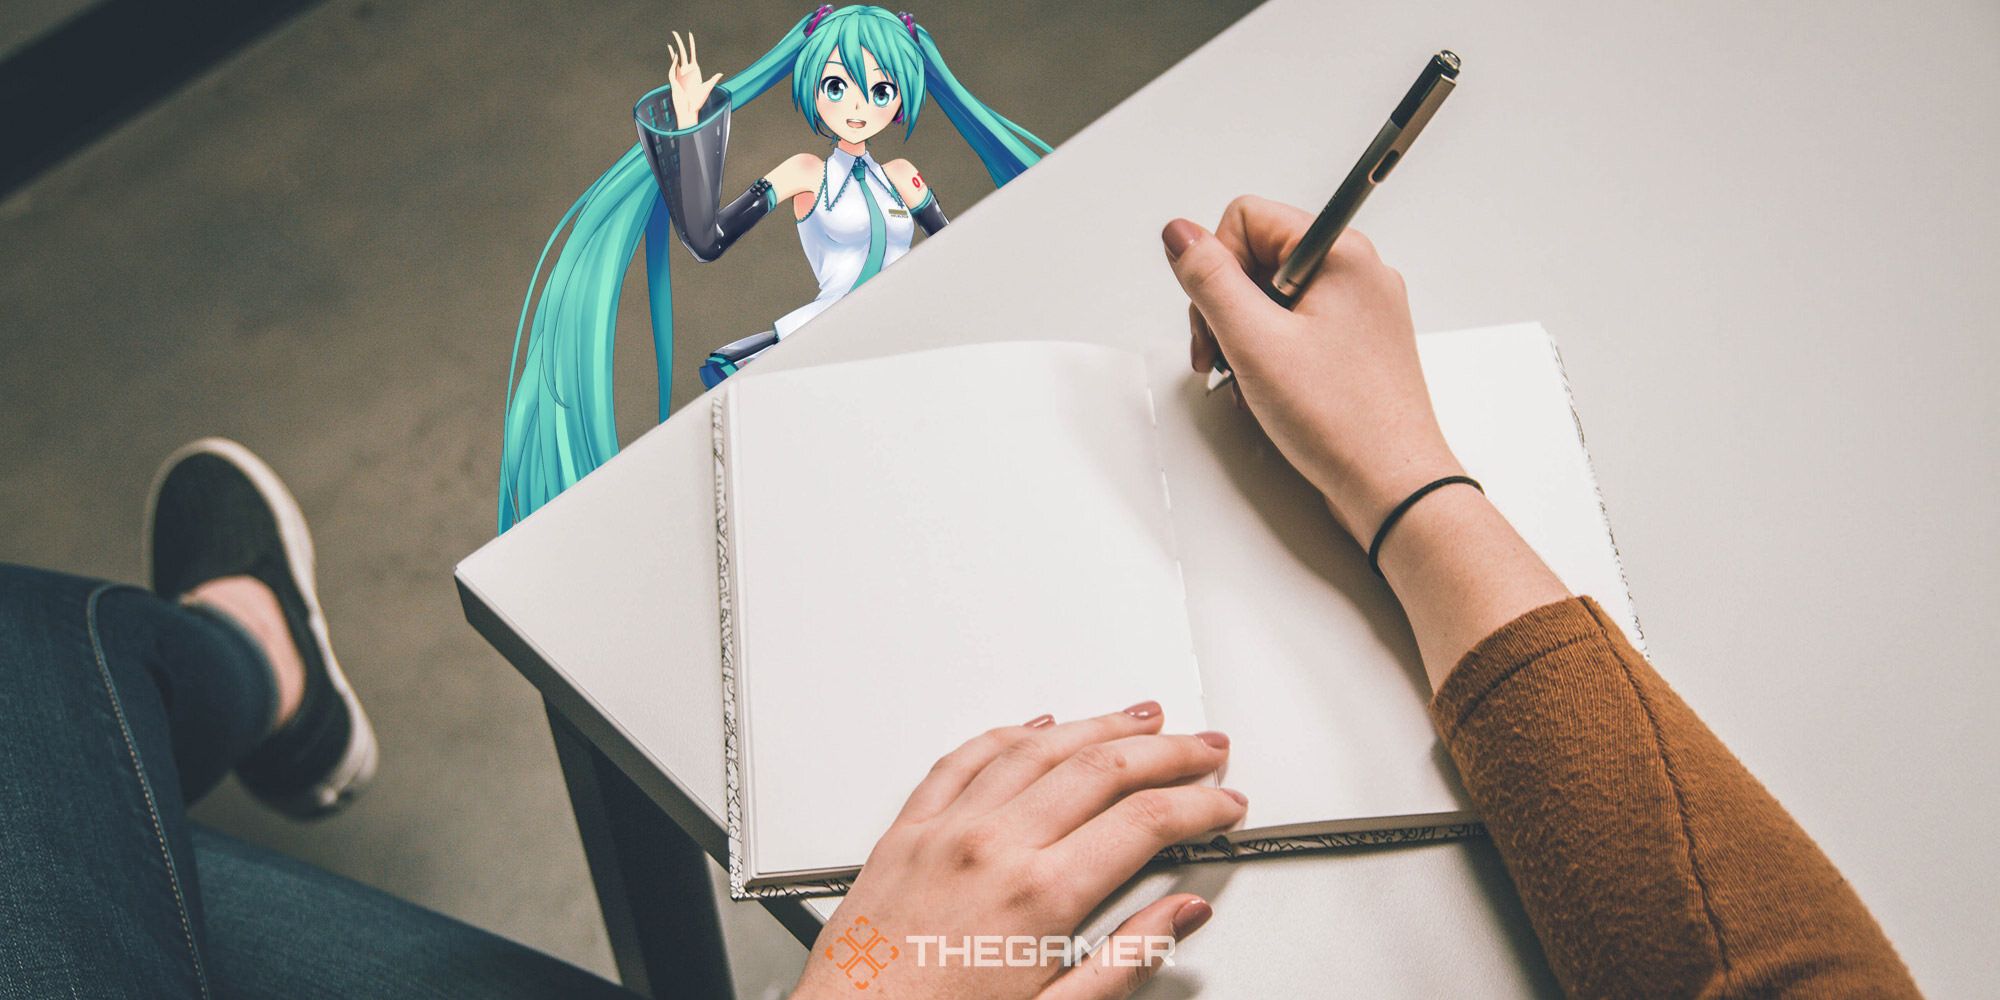 hatsune miku peeking out from behind a notepad and waving